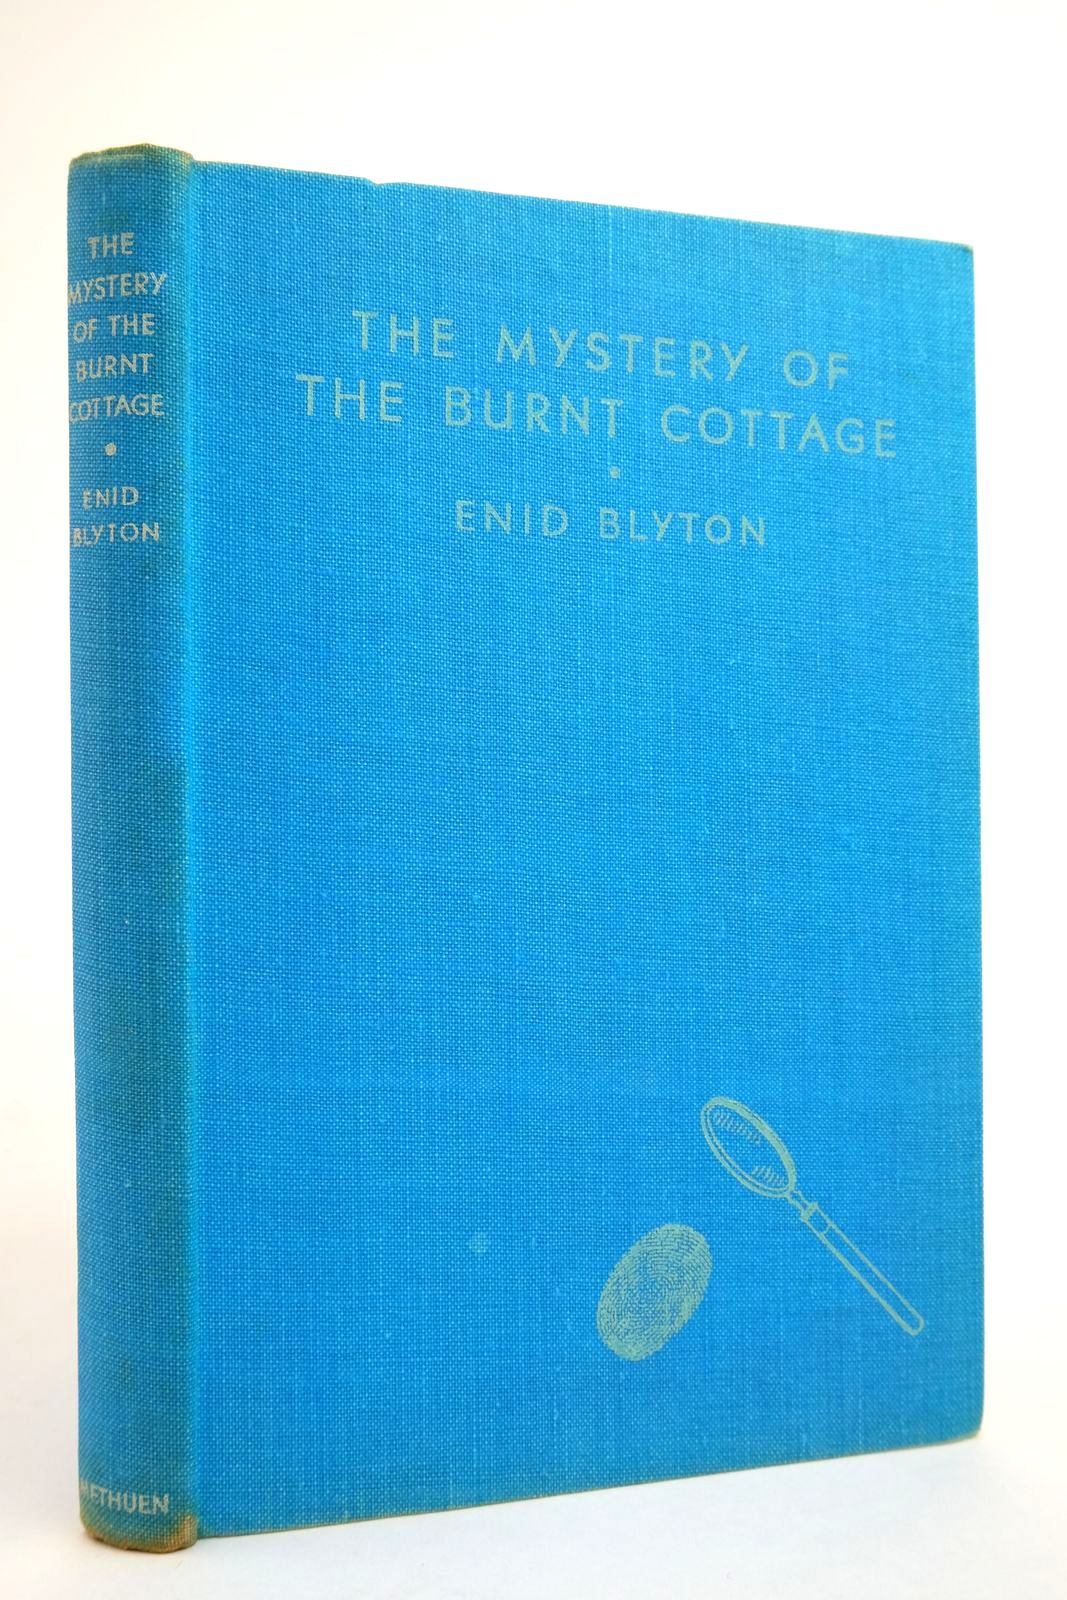 Photo of THE MYSTERY OF THE BURNT COTTAGE written by Blyton, Enid illustrated by Abbey, J. published by Methuen & Co. Ltd. (STOCK CODE: 2135594)  for sale by Stella & Rose's Books